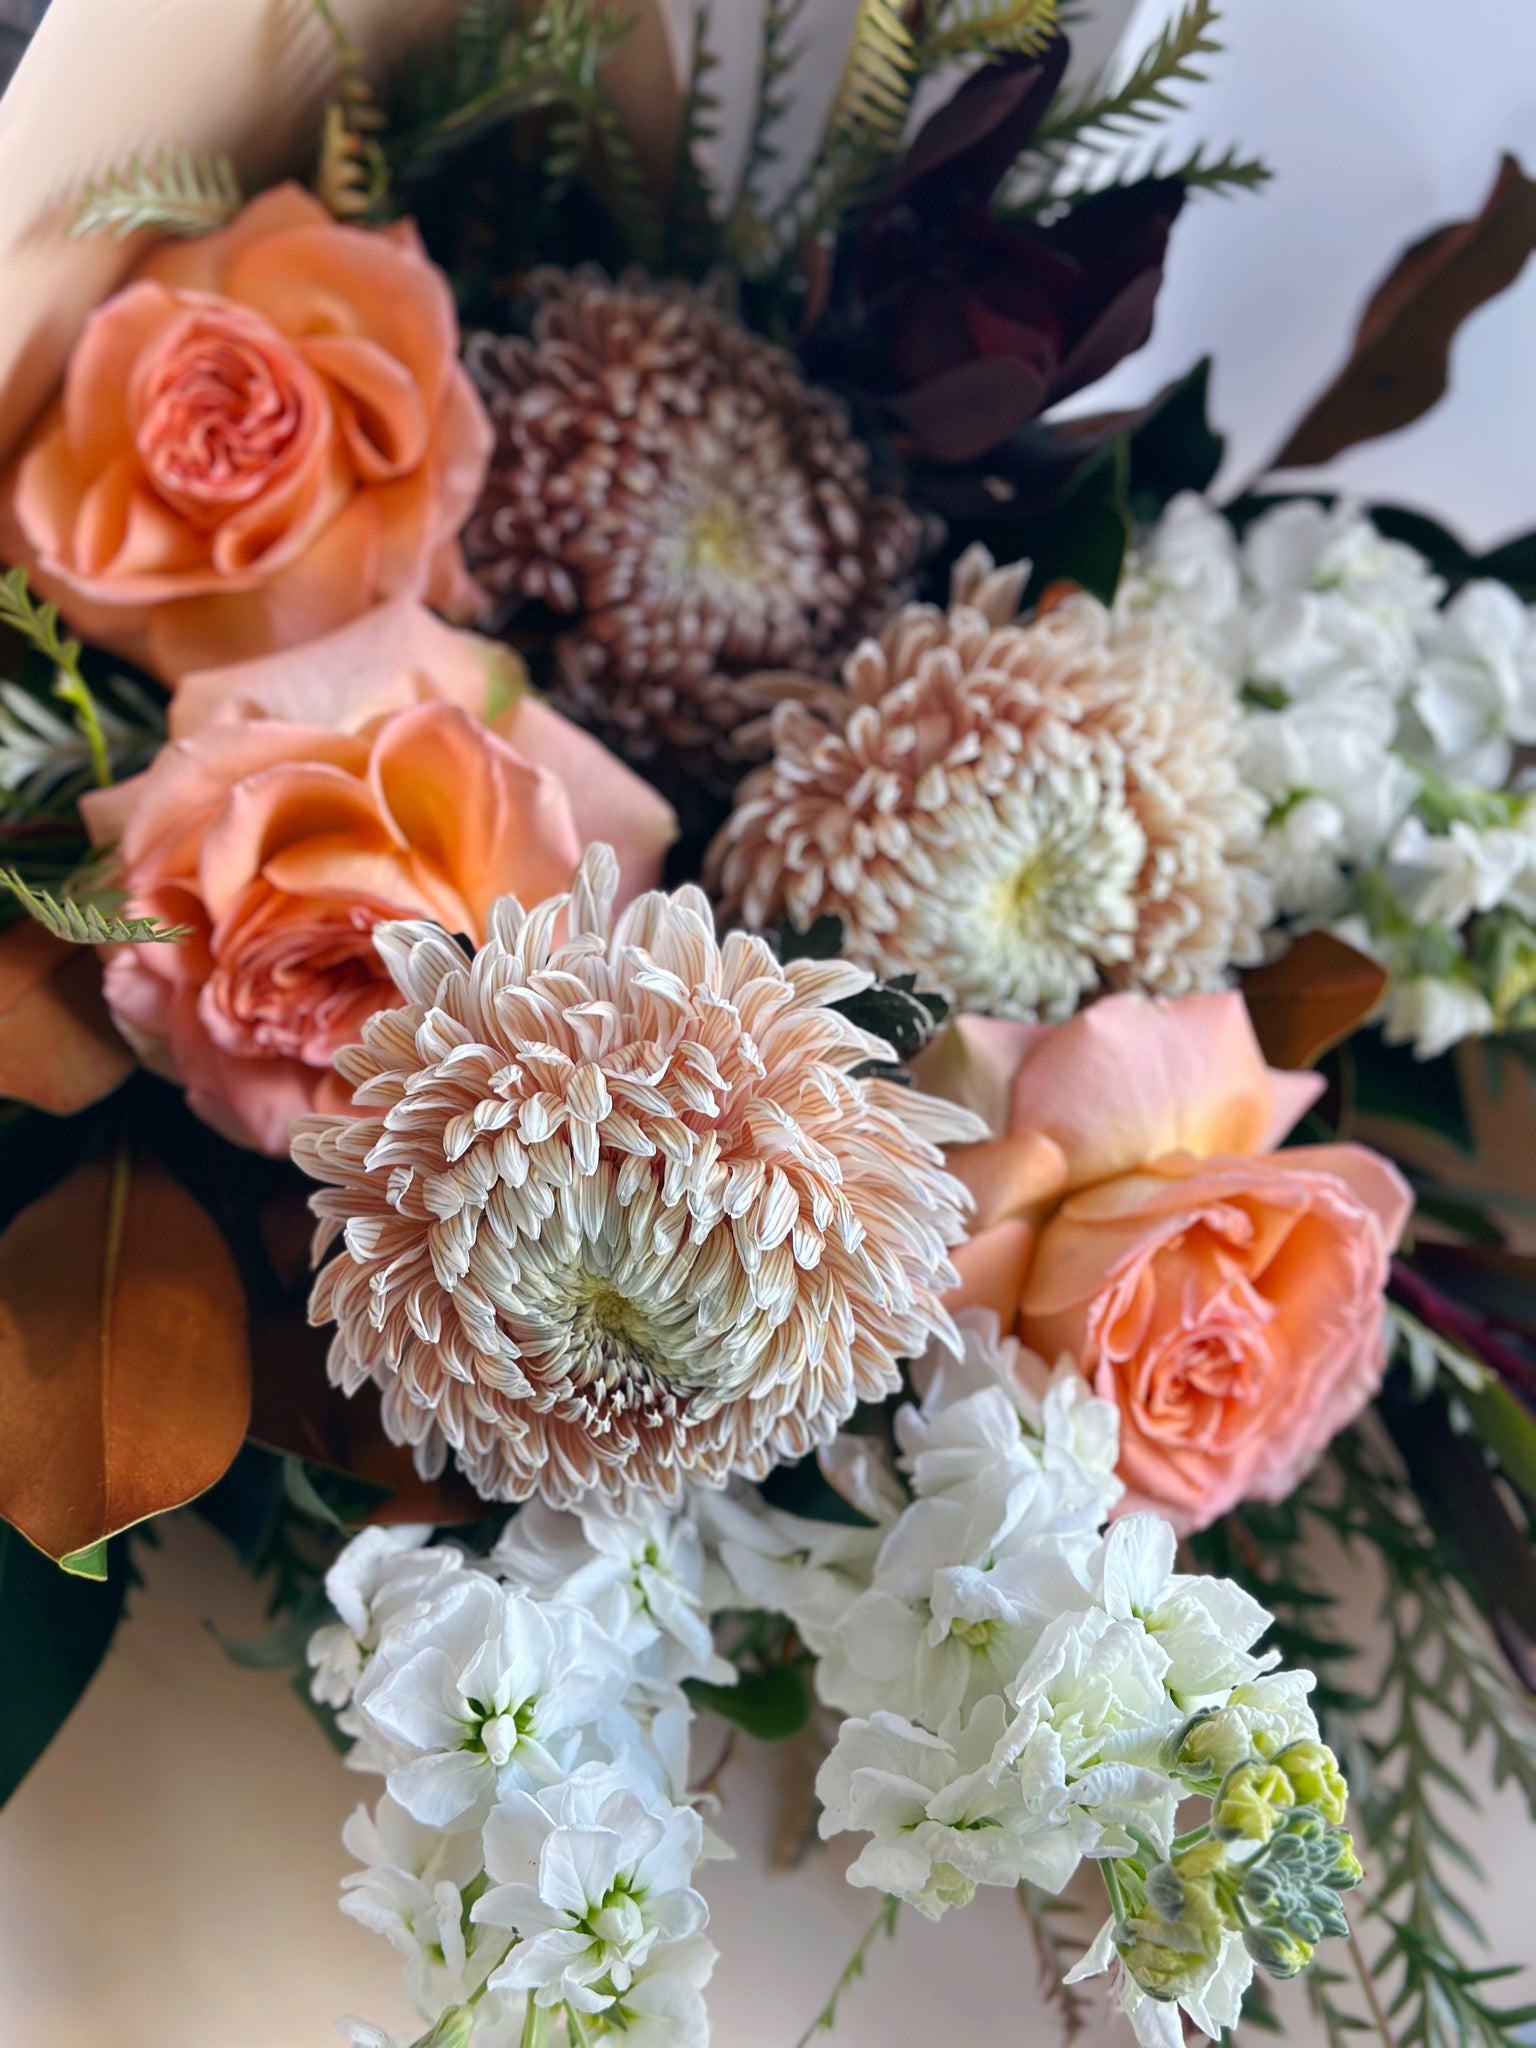 Tuesday Blooms Delivered - TUESDAY